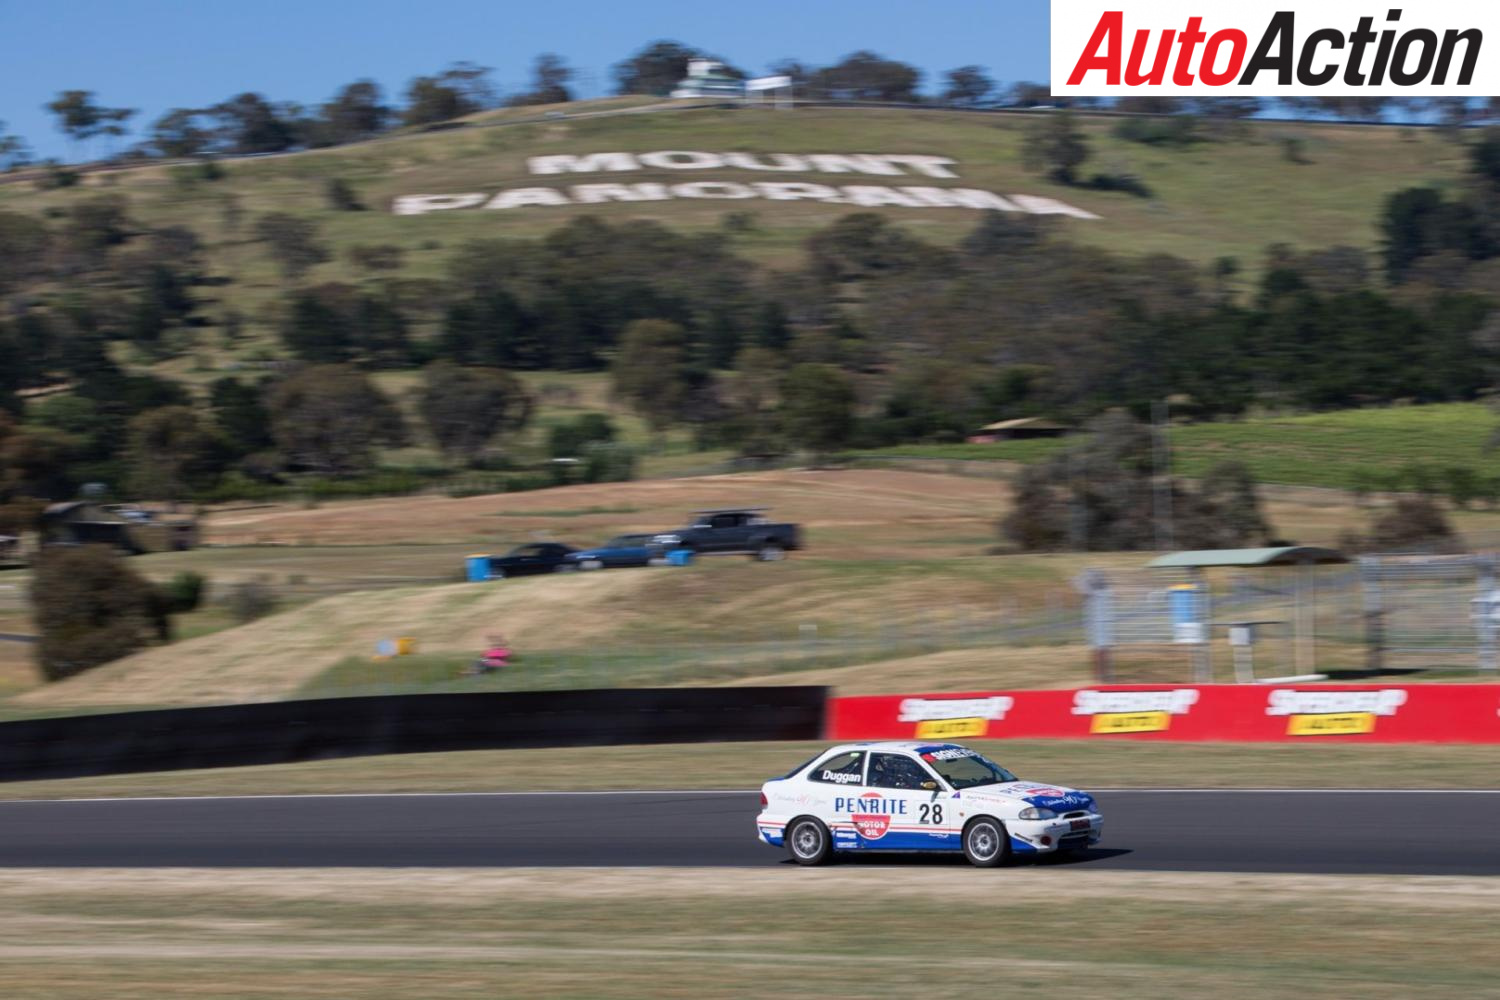 Hyundai Excel's join the support program for the Bathurst 6 Hour - Photo: Rhys Vandersyde